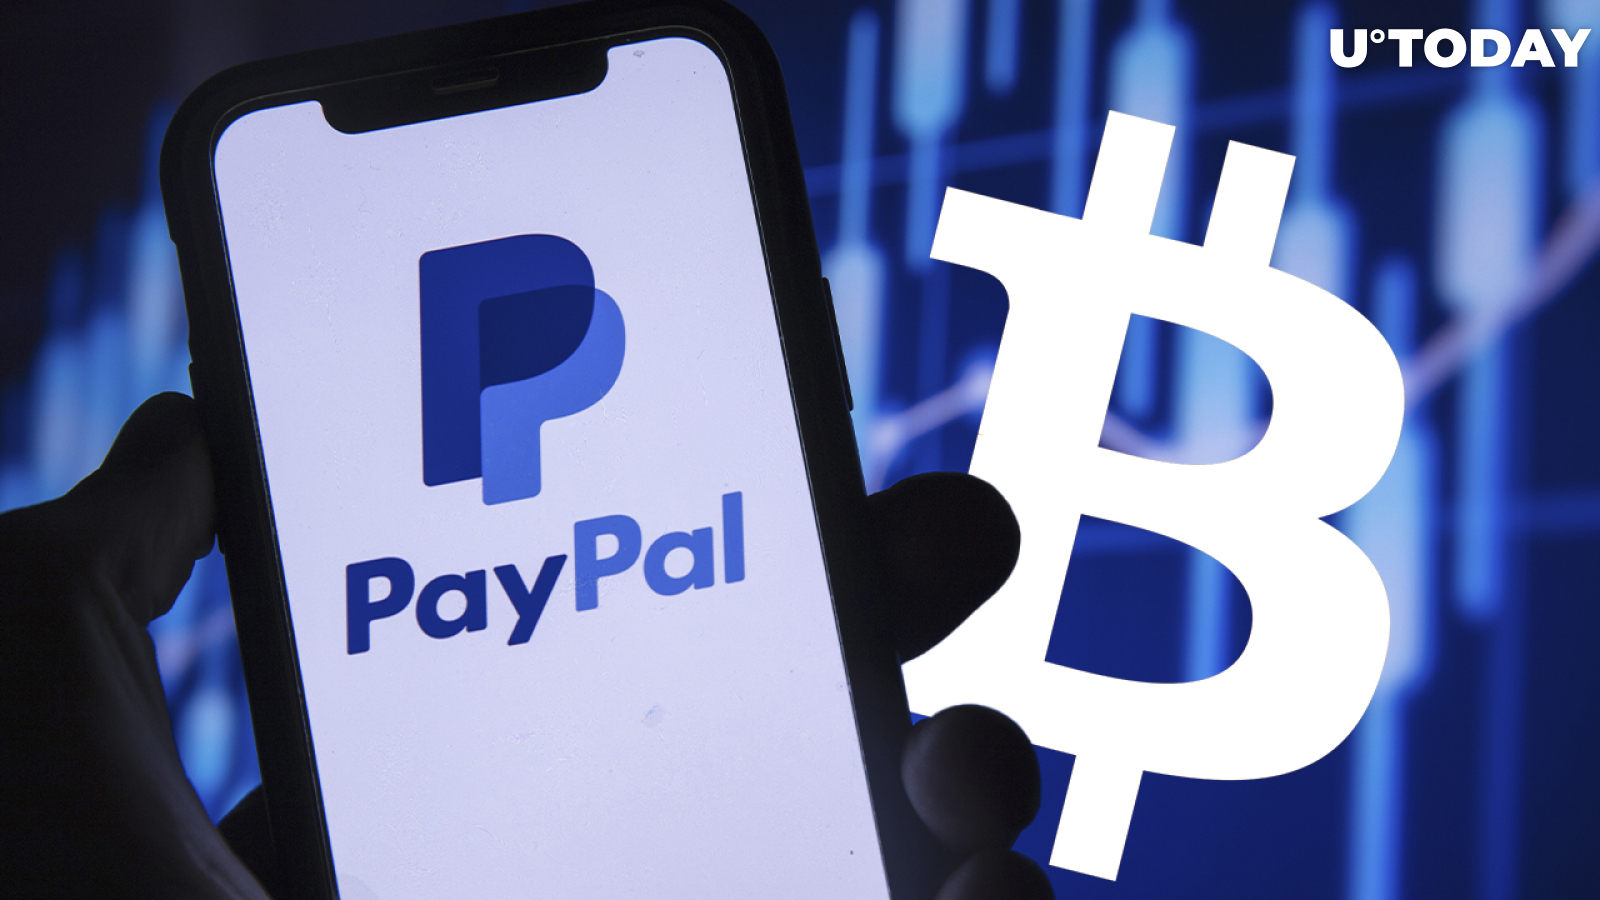 Here's Why Bitcoin May Get Hurt by PayPal Shares Dropping 25%, Peter Schiff Opines